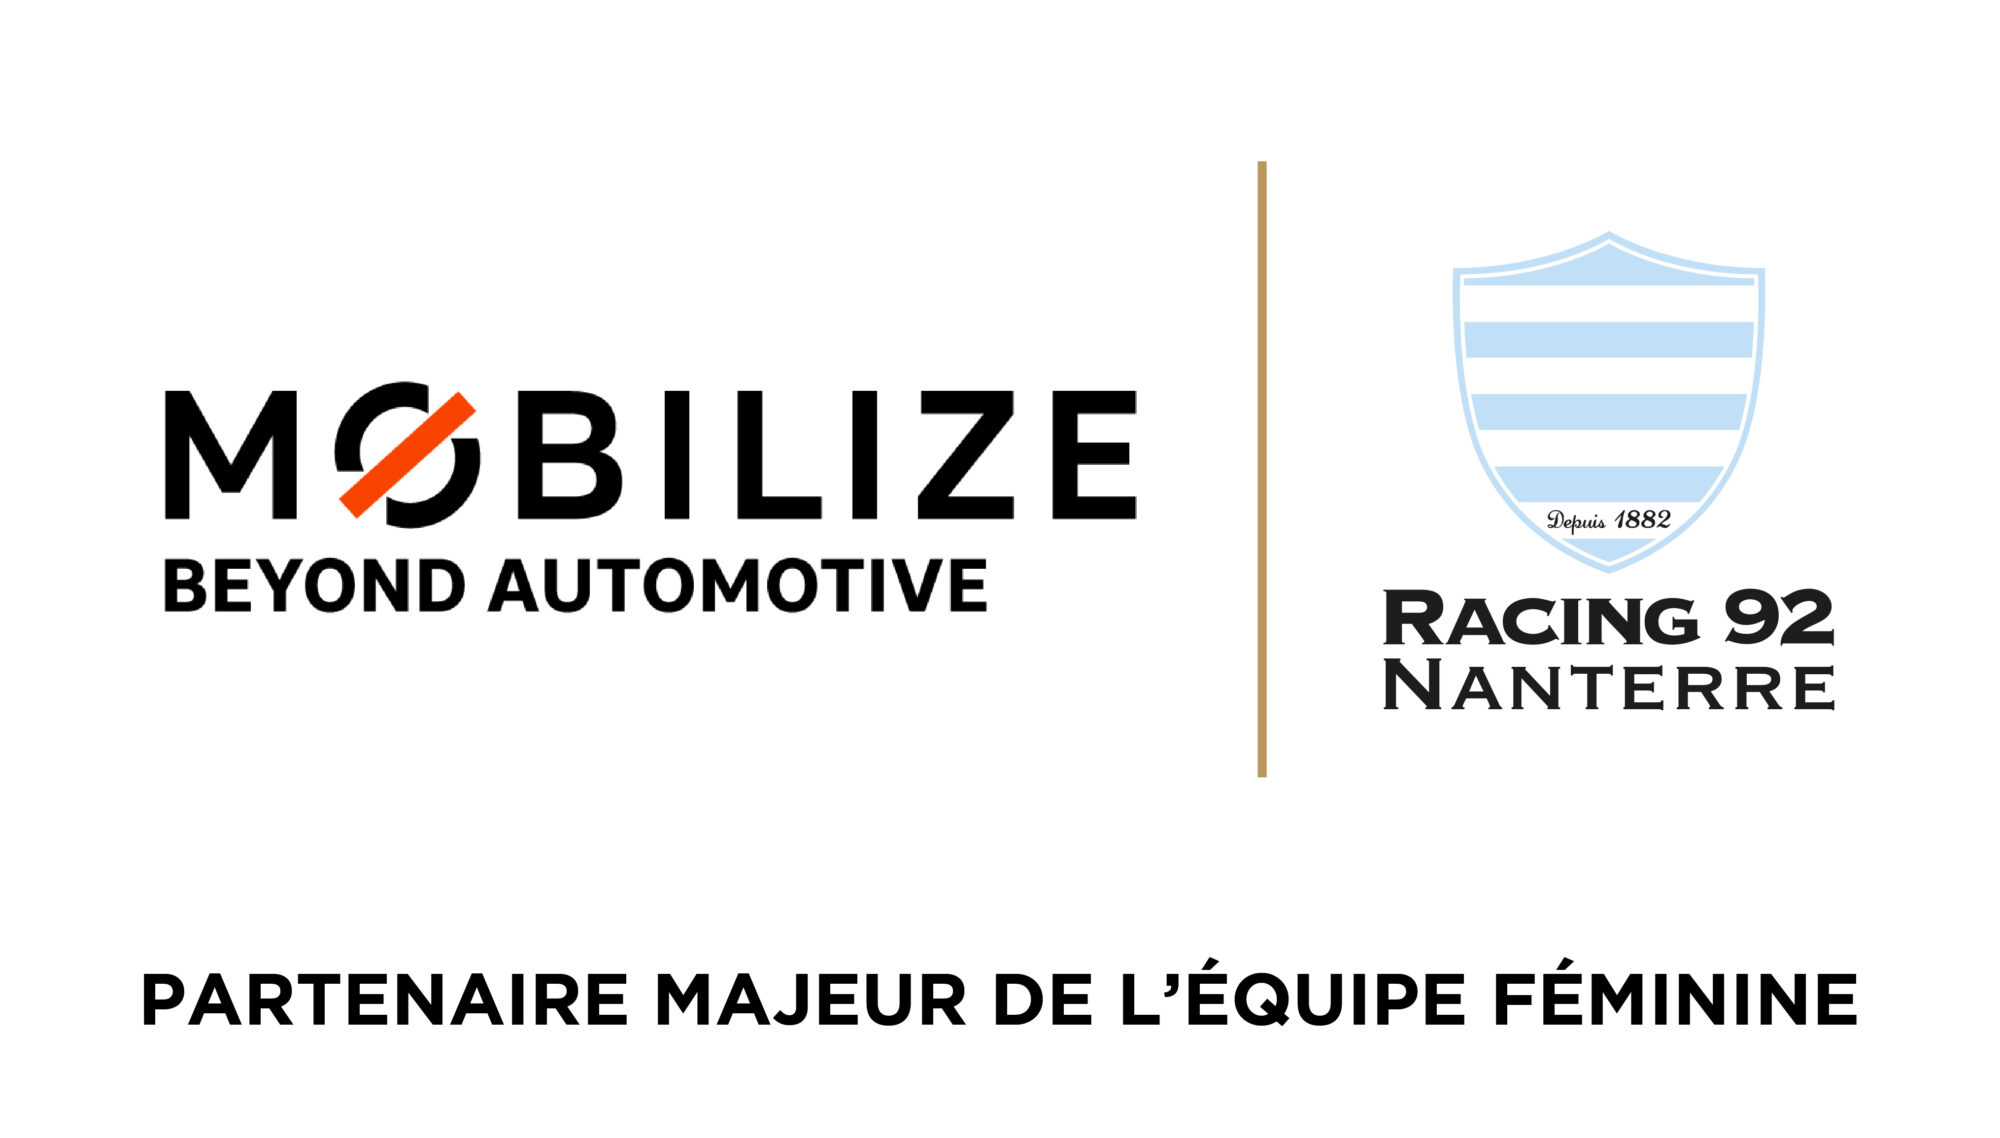 Mobilize, a partner actively supporting the Racing 92 Nanterre women’s team